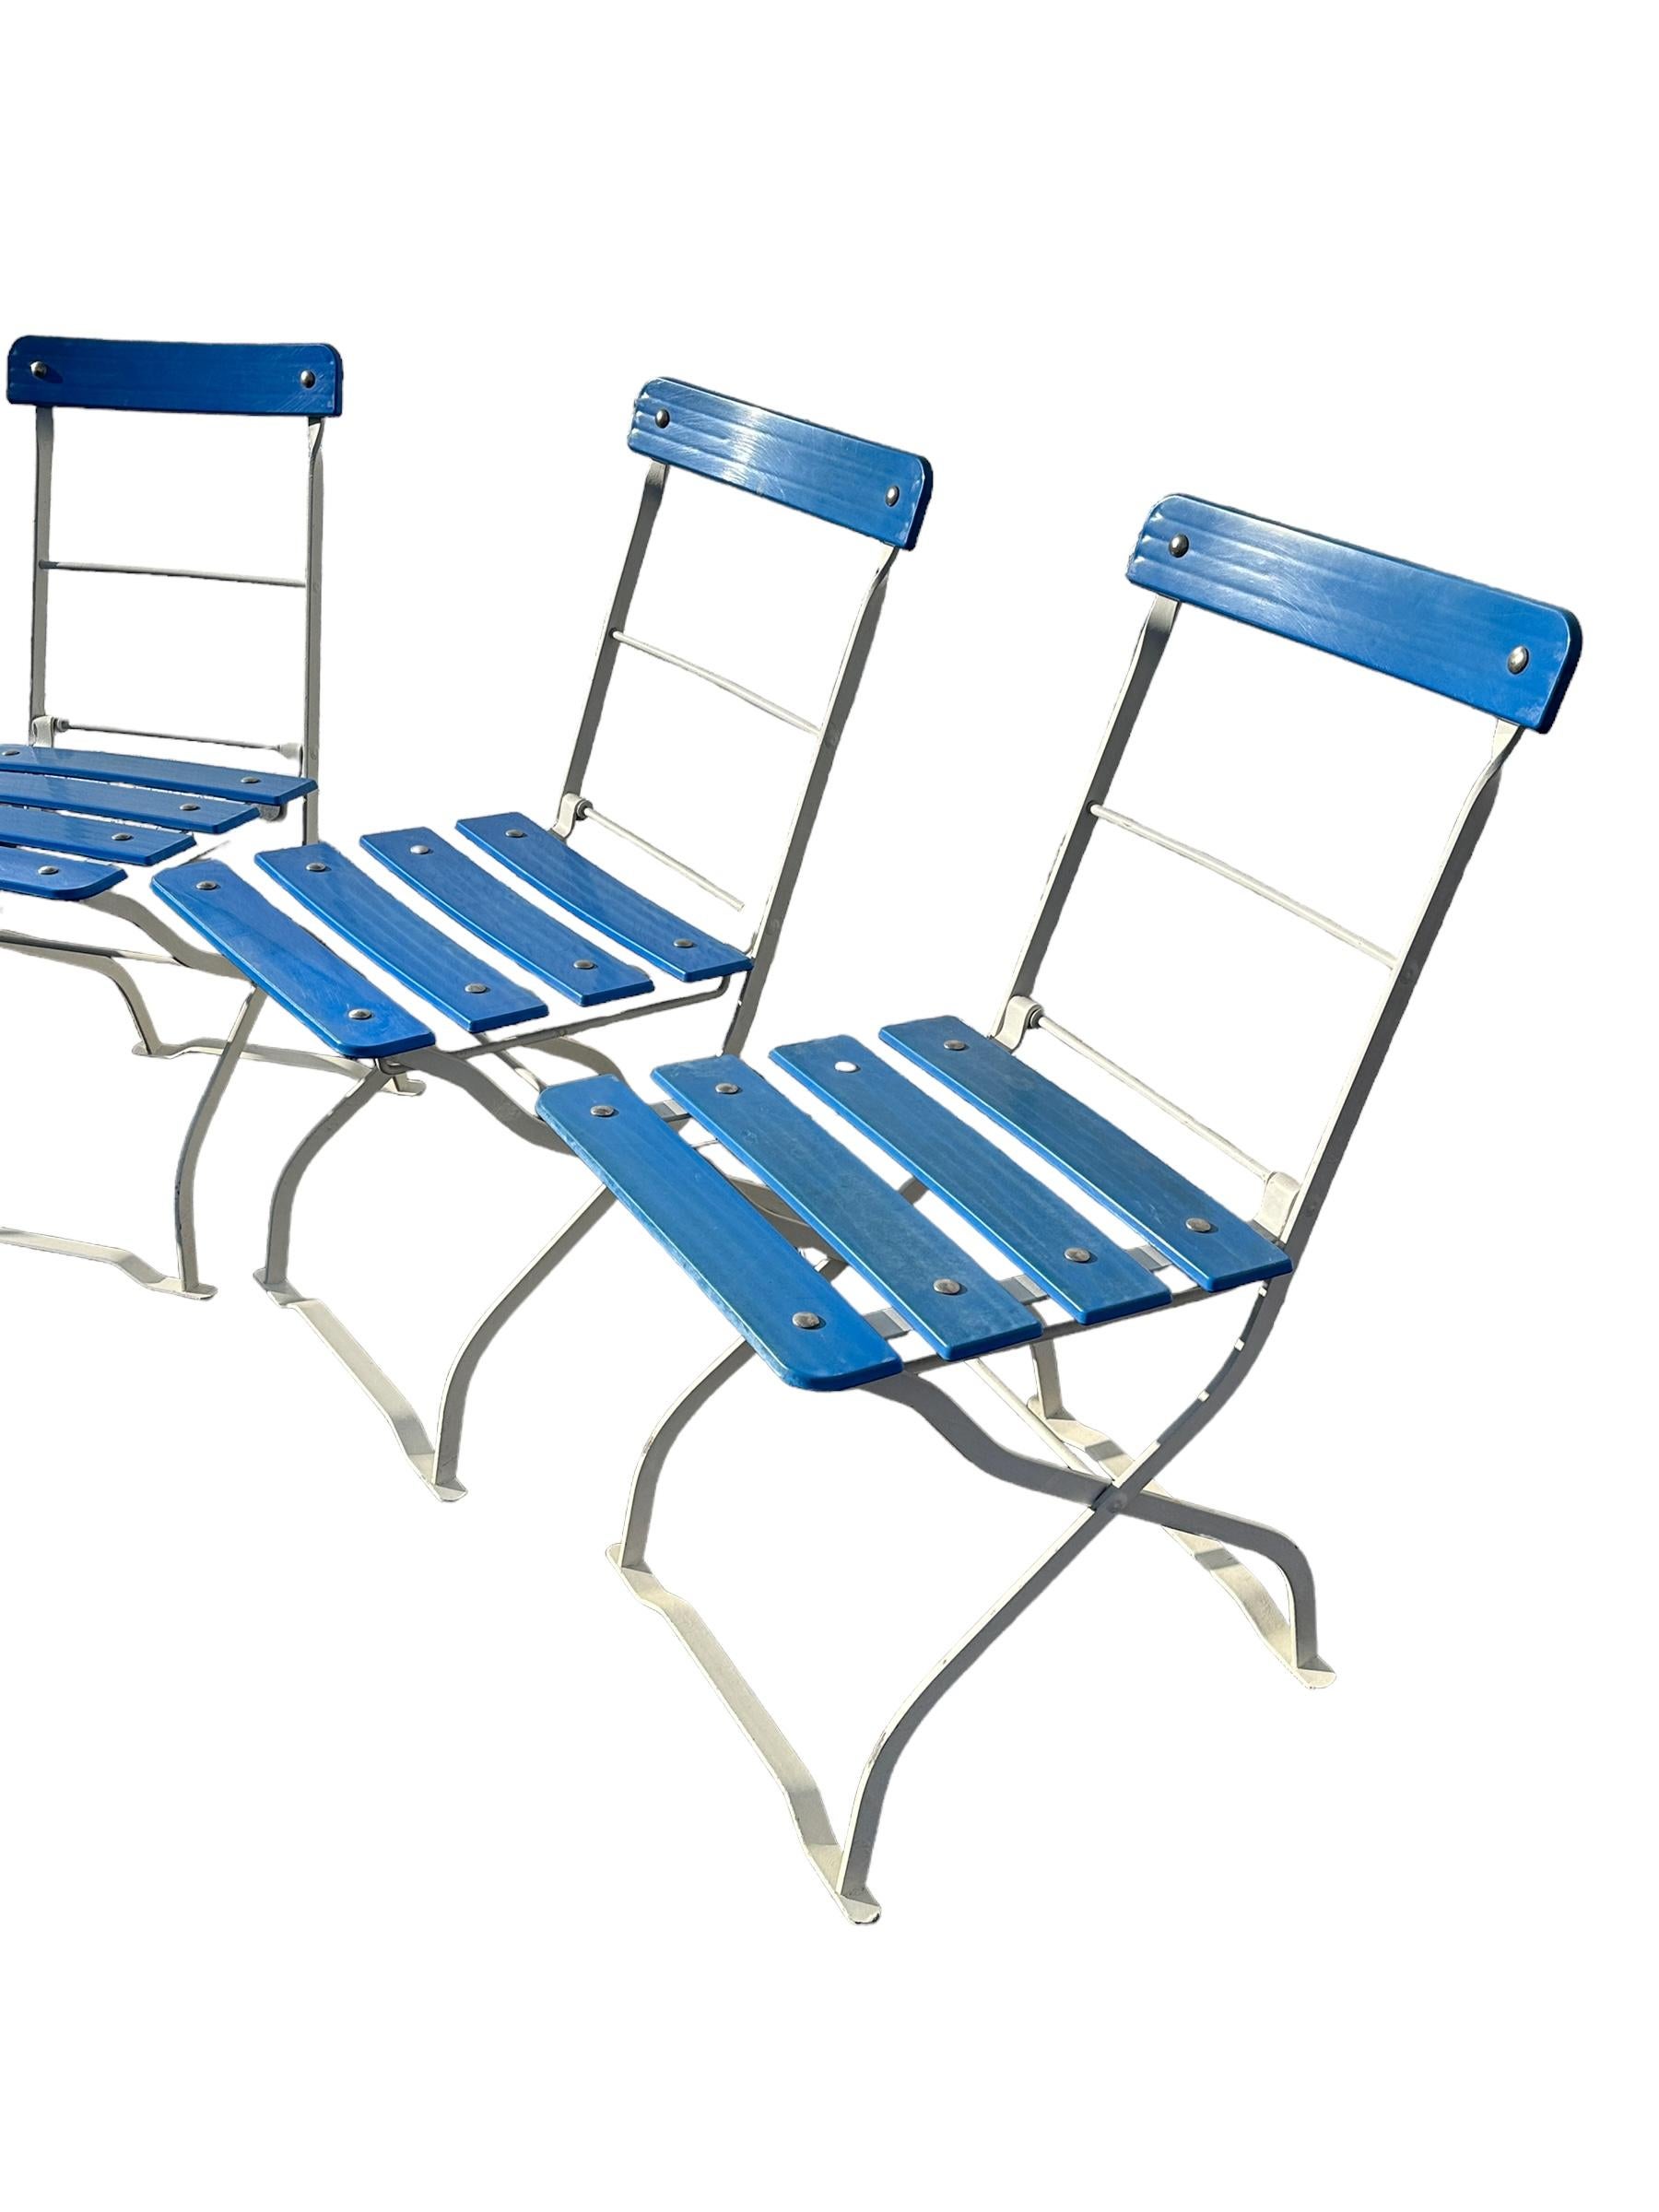 Late 20th Century Set of Four Iron Bavarian Beer Garden Folding Chairs, Hacker Pschorr Munich For Sale